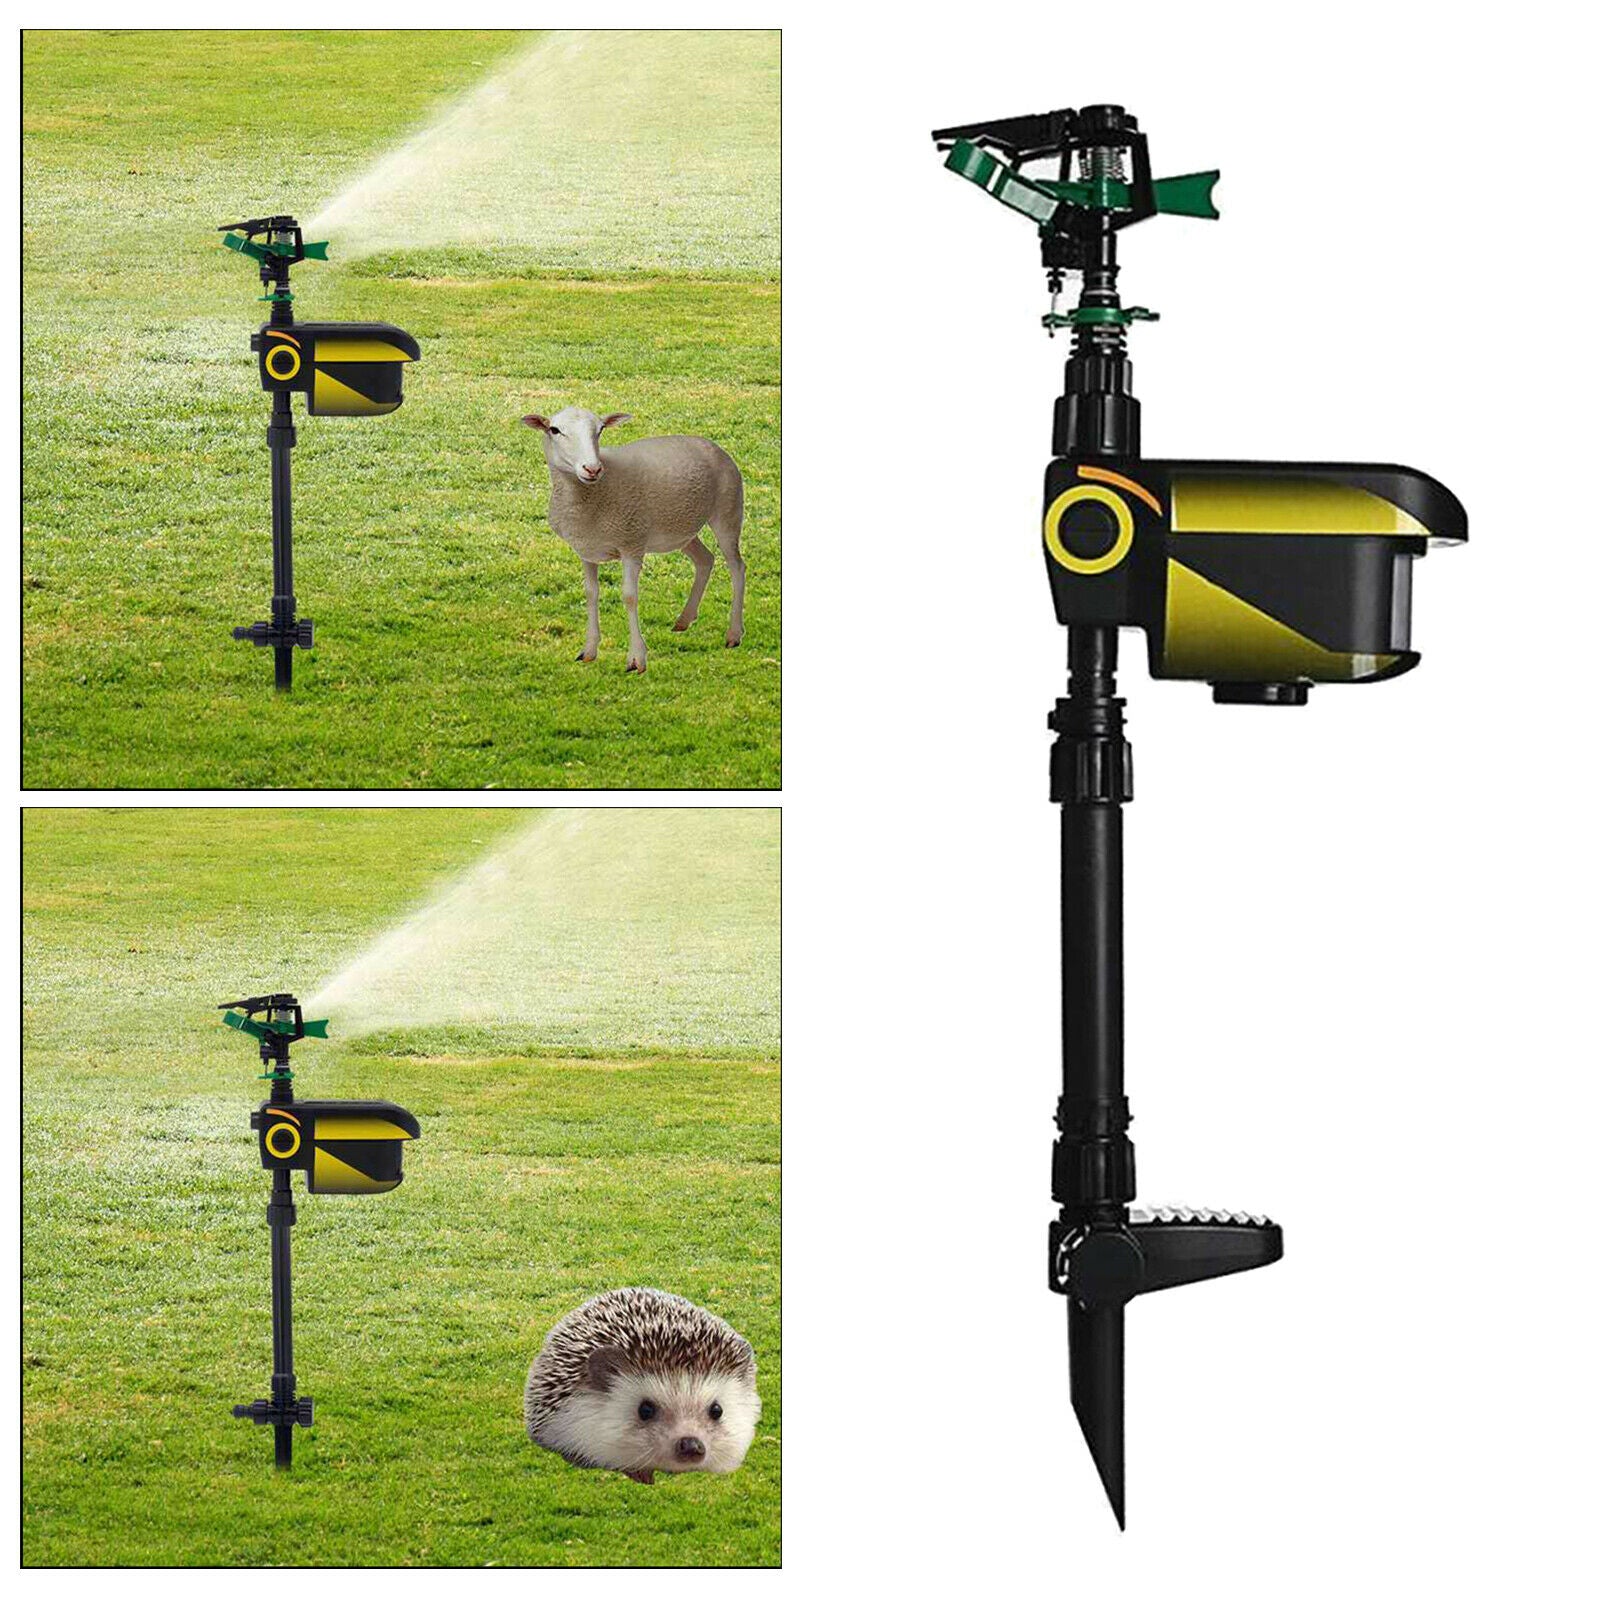 Motion Activated Spray Animals Repeller Water Blaster for Squirrels Rabbit